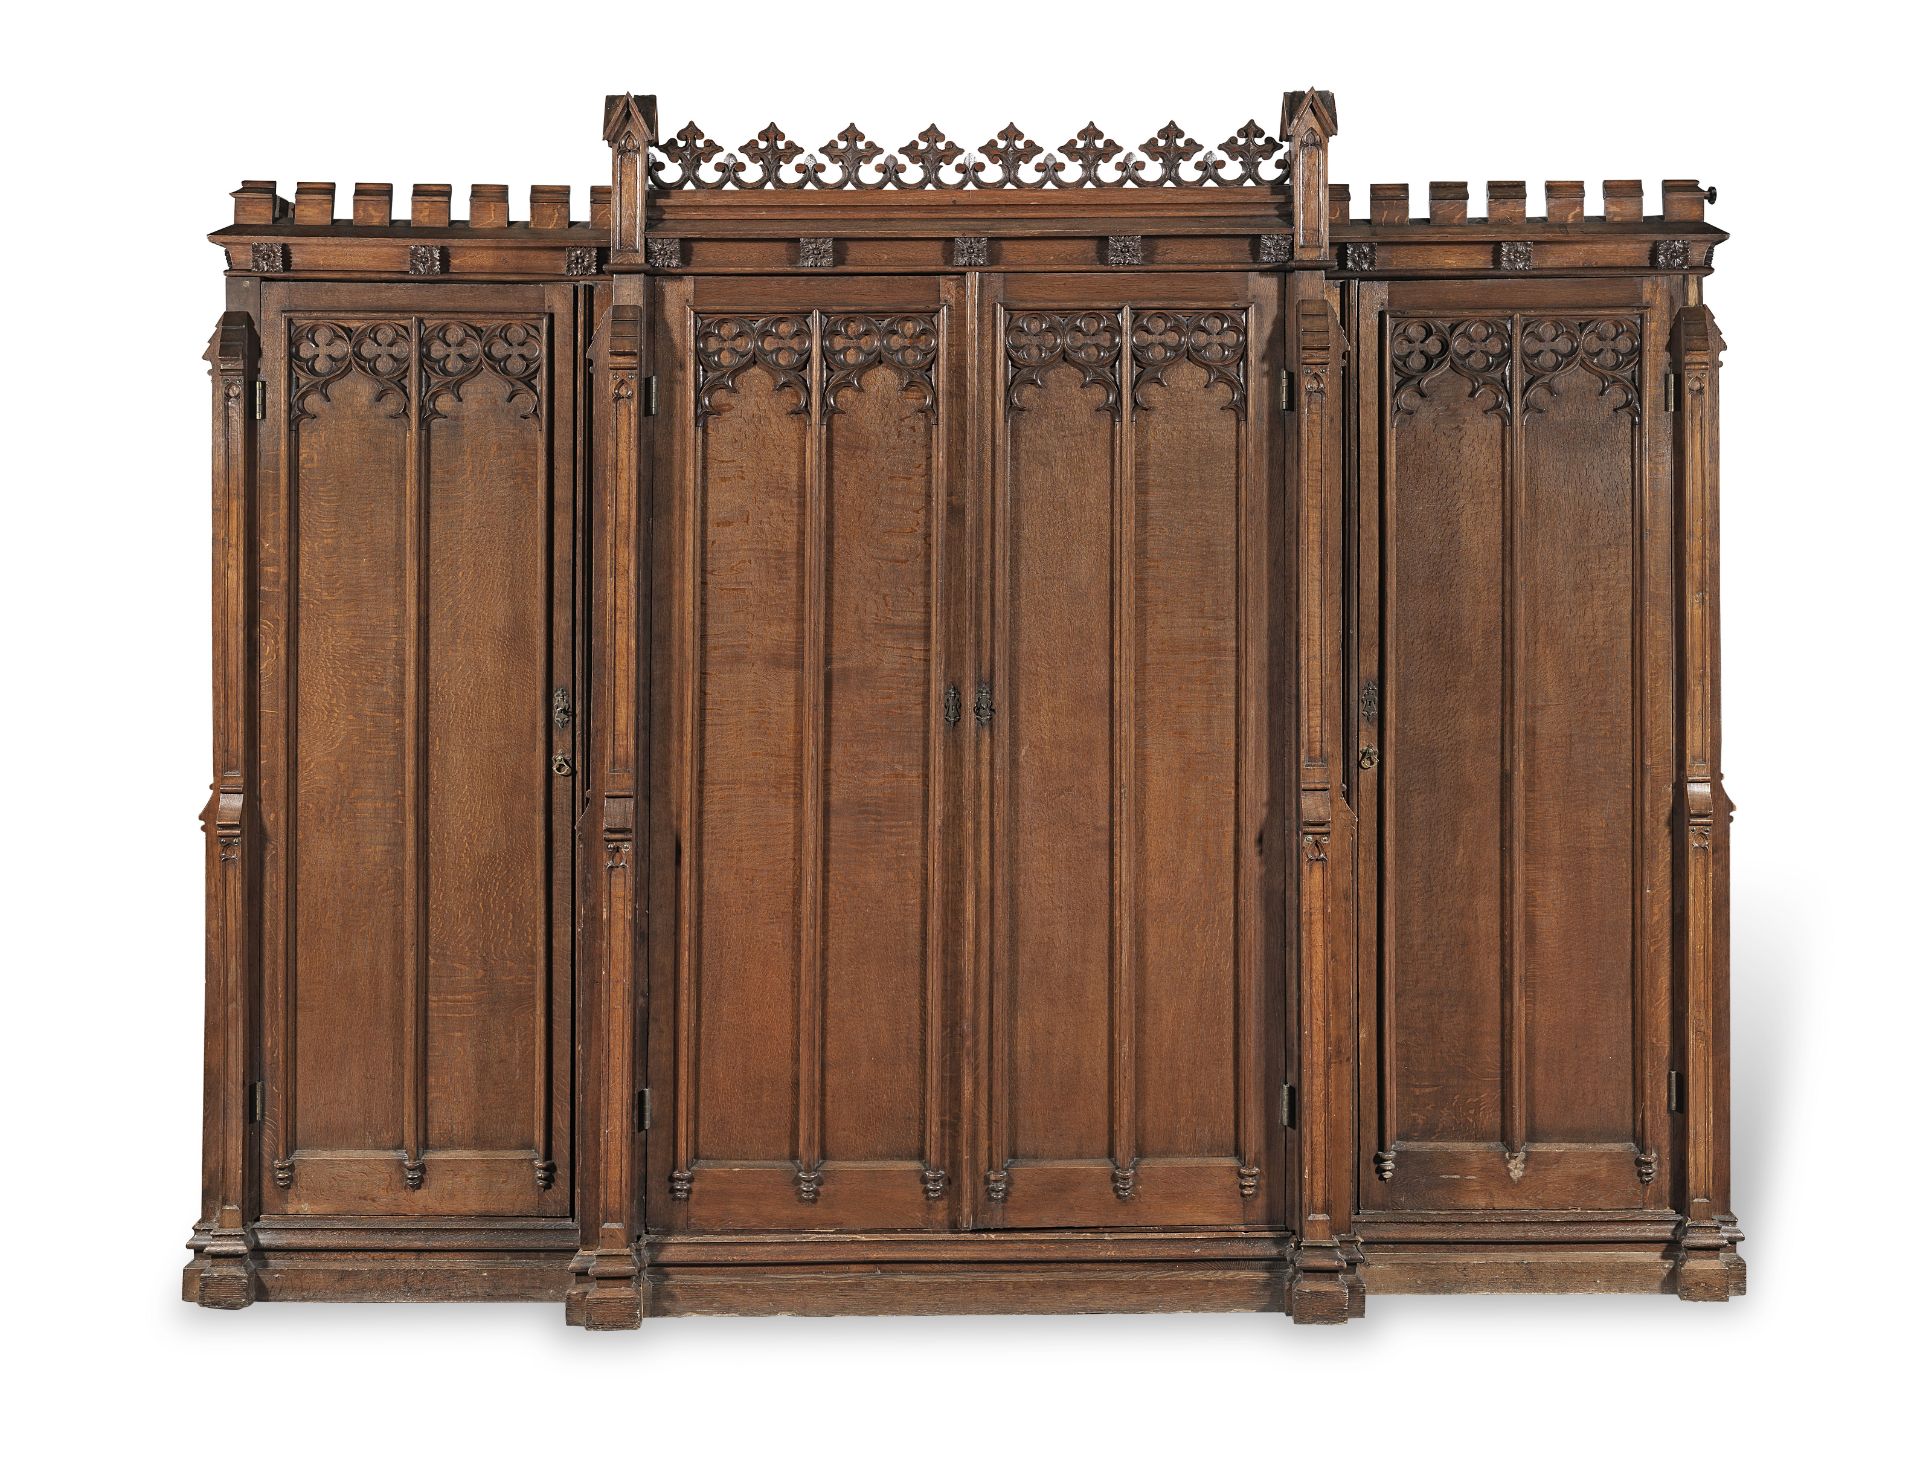 An early Victorian gothic revival oak breakfront wardrobe in the manner of Thomas King